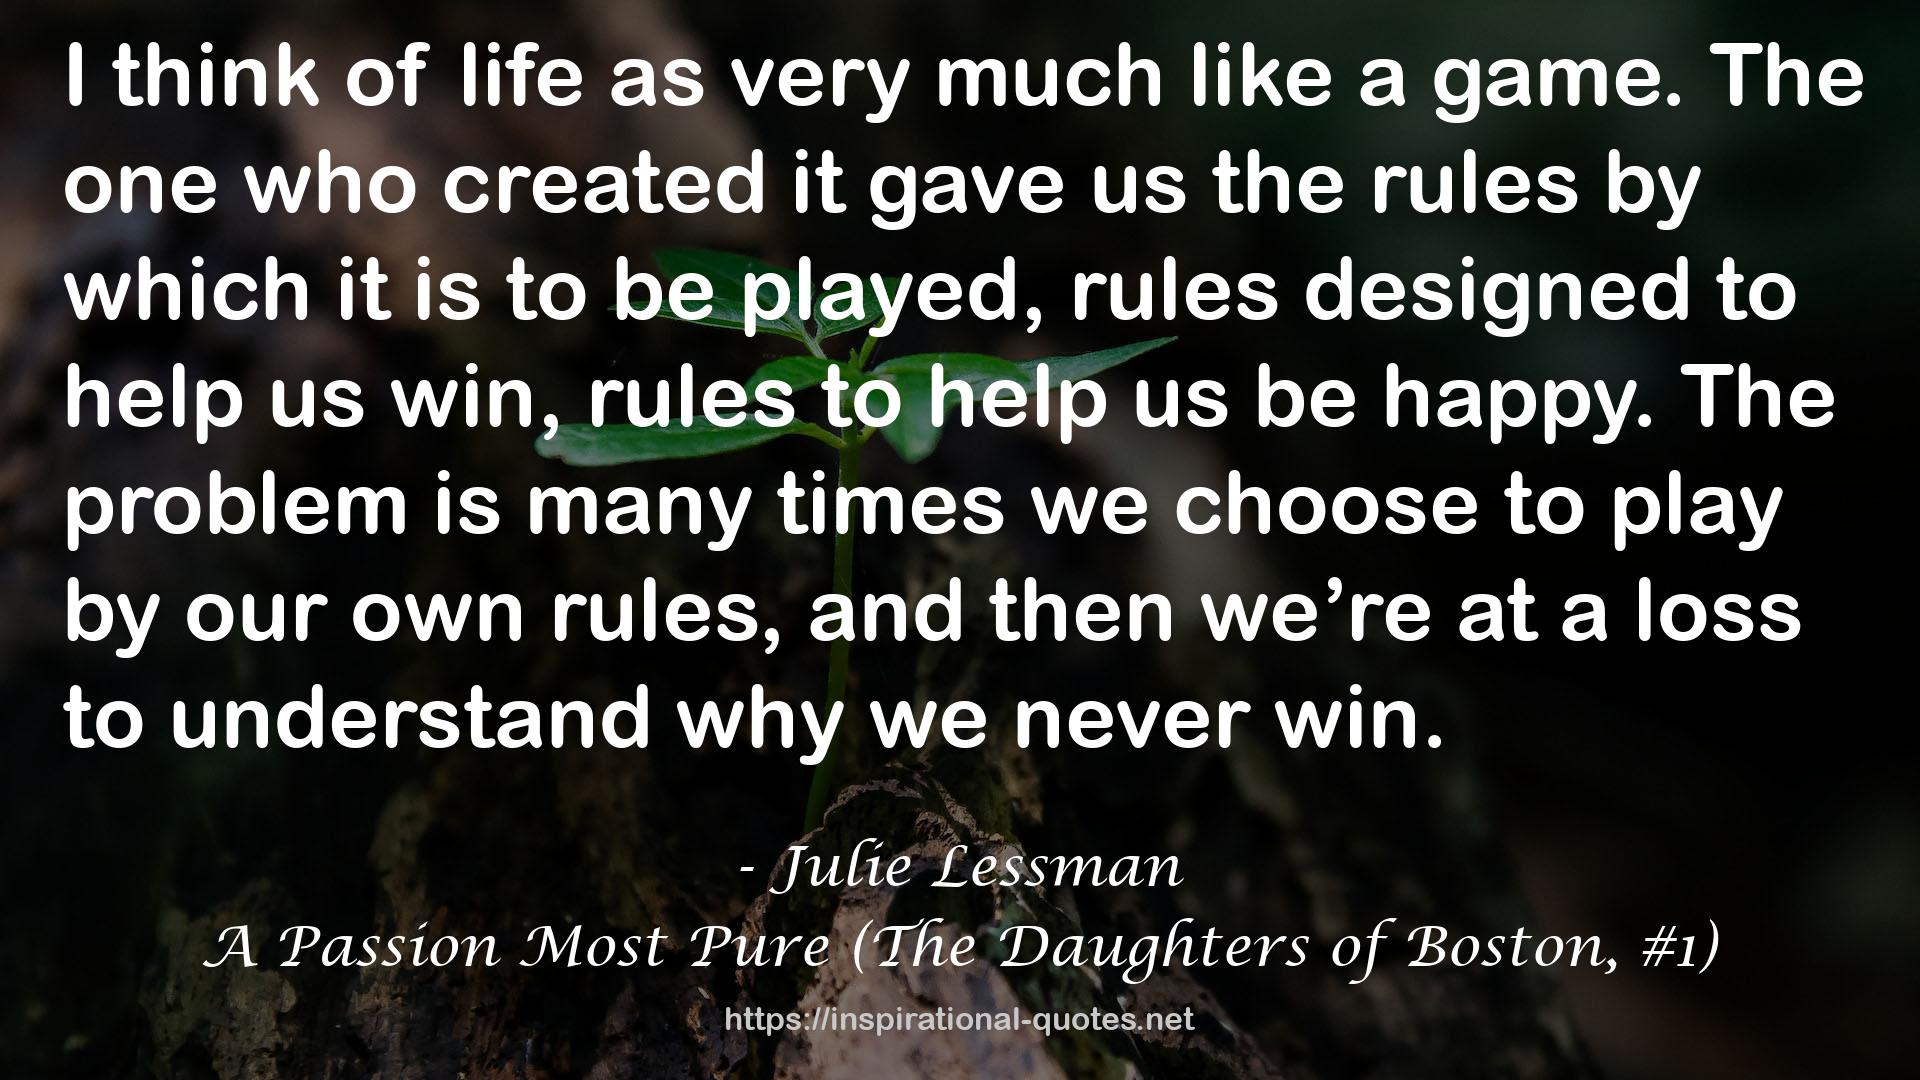 A Passion Most Pure (The Daughters of Boston, #1) QUOTES